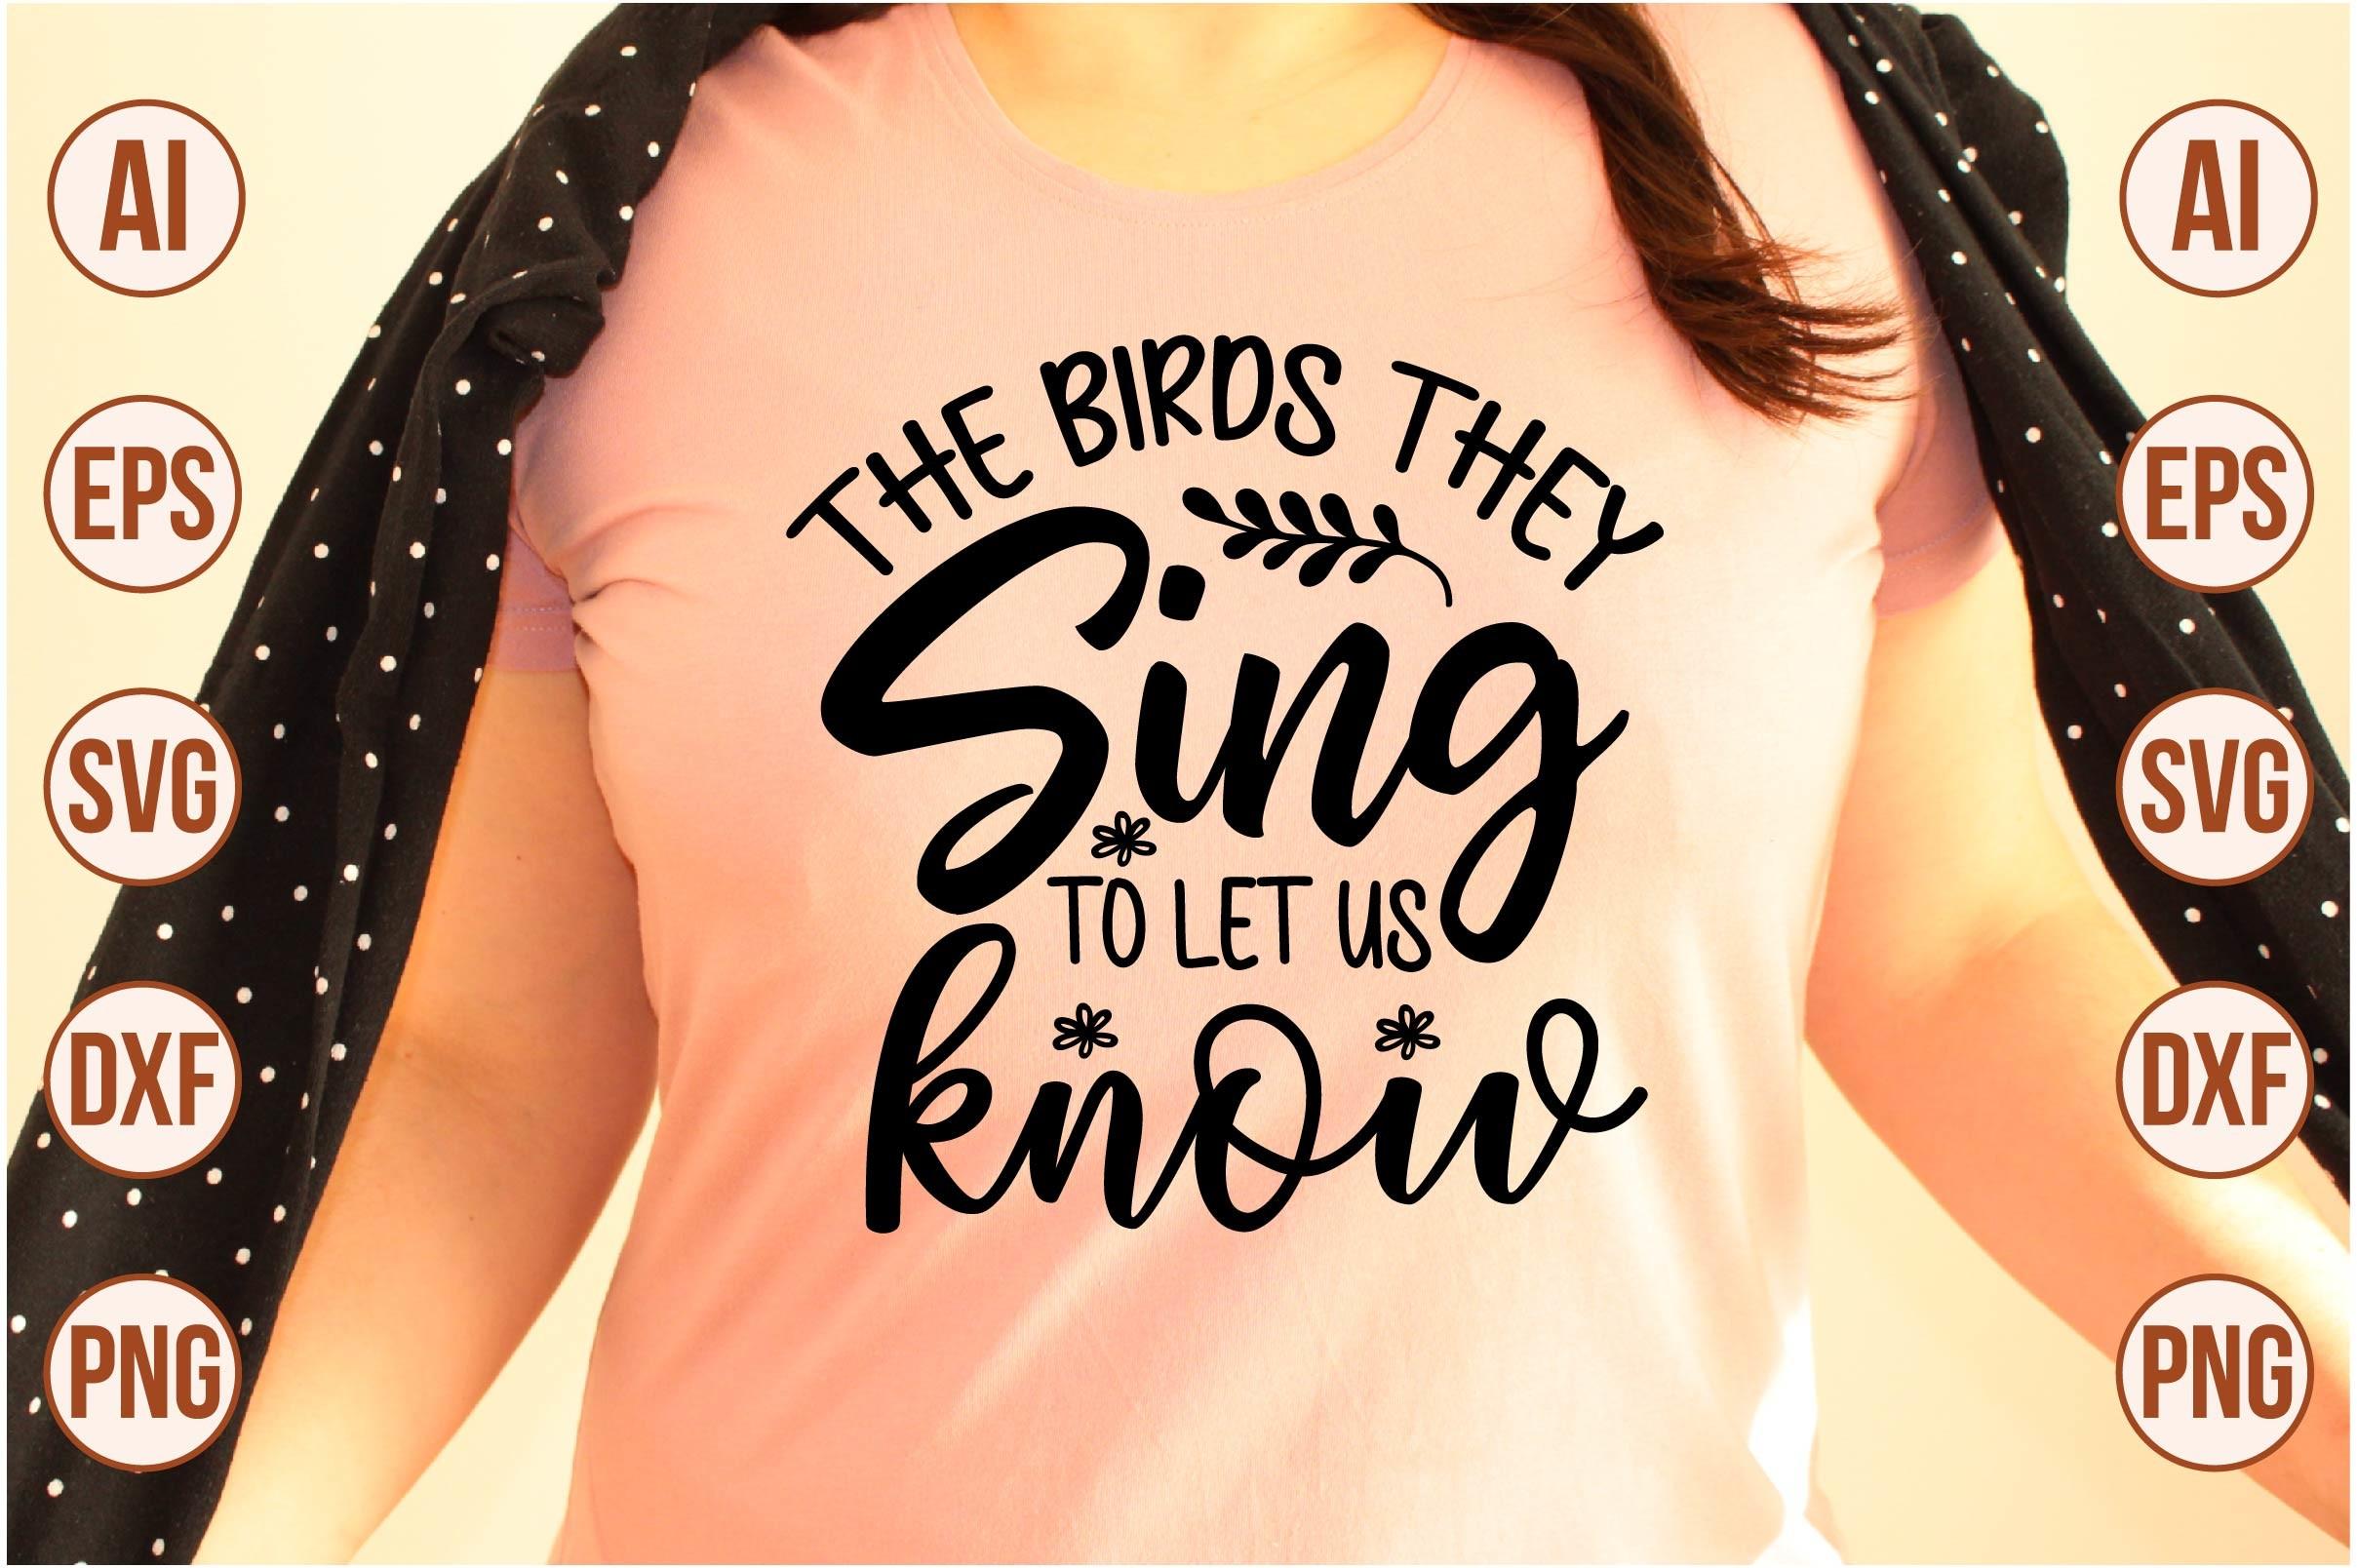 The Birds They Sing to Let Us Know